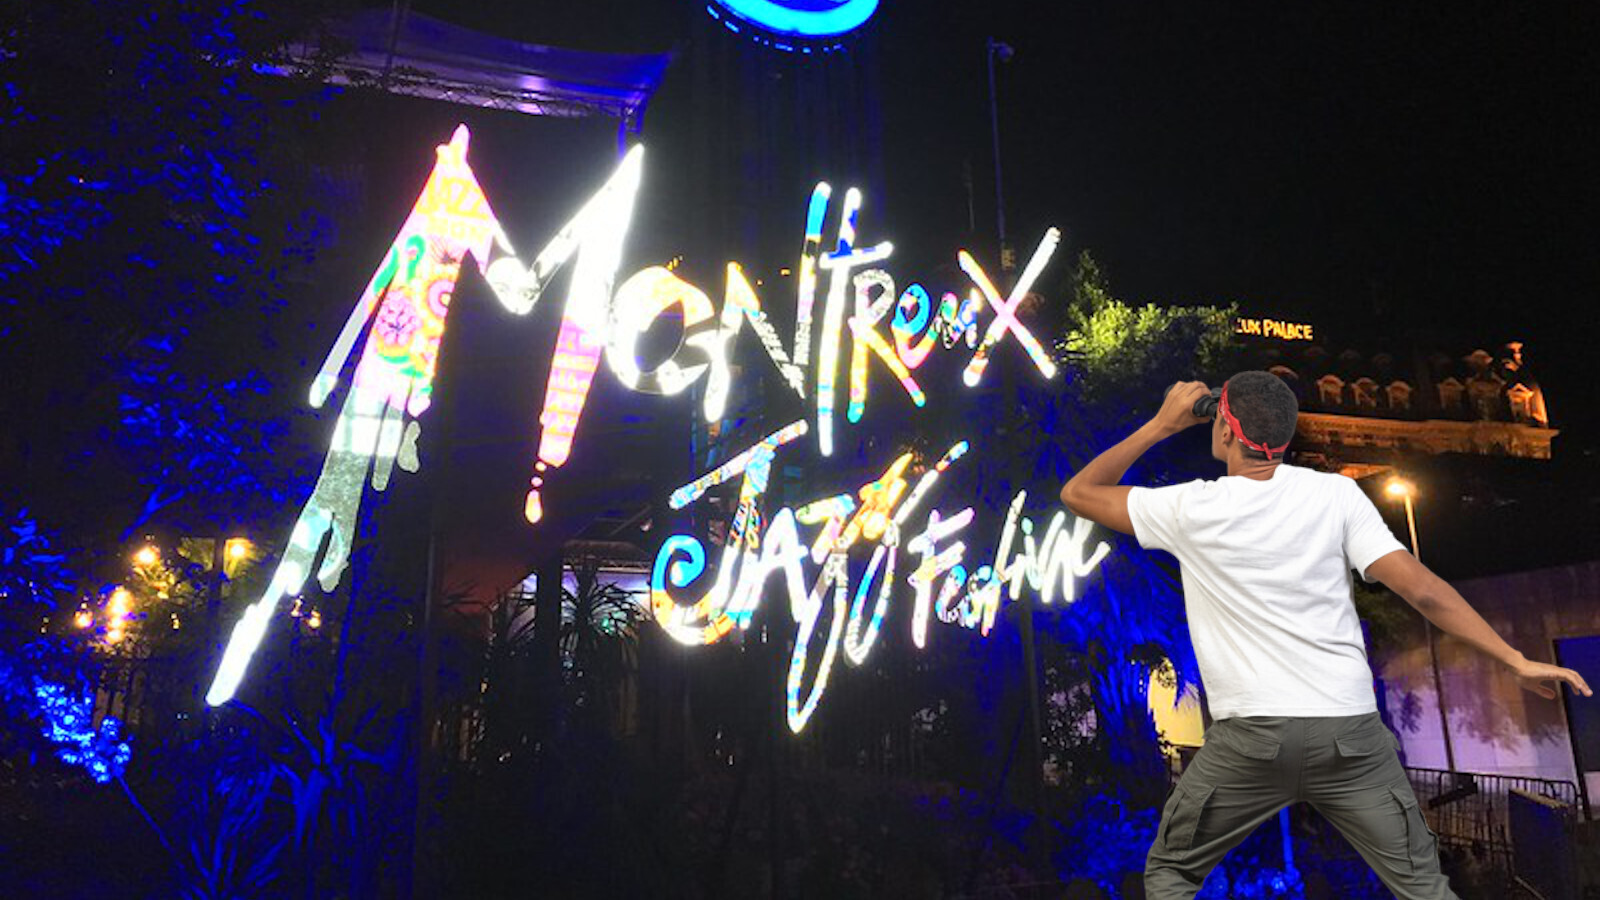 Watch 50+ live performances from Montreux Jazz Festival for free